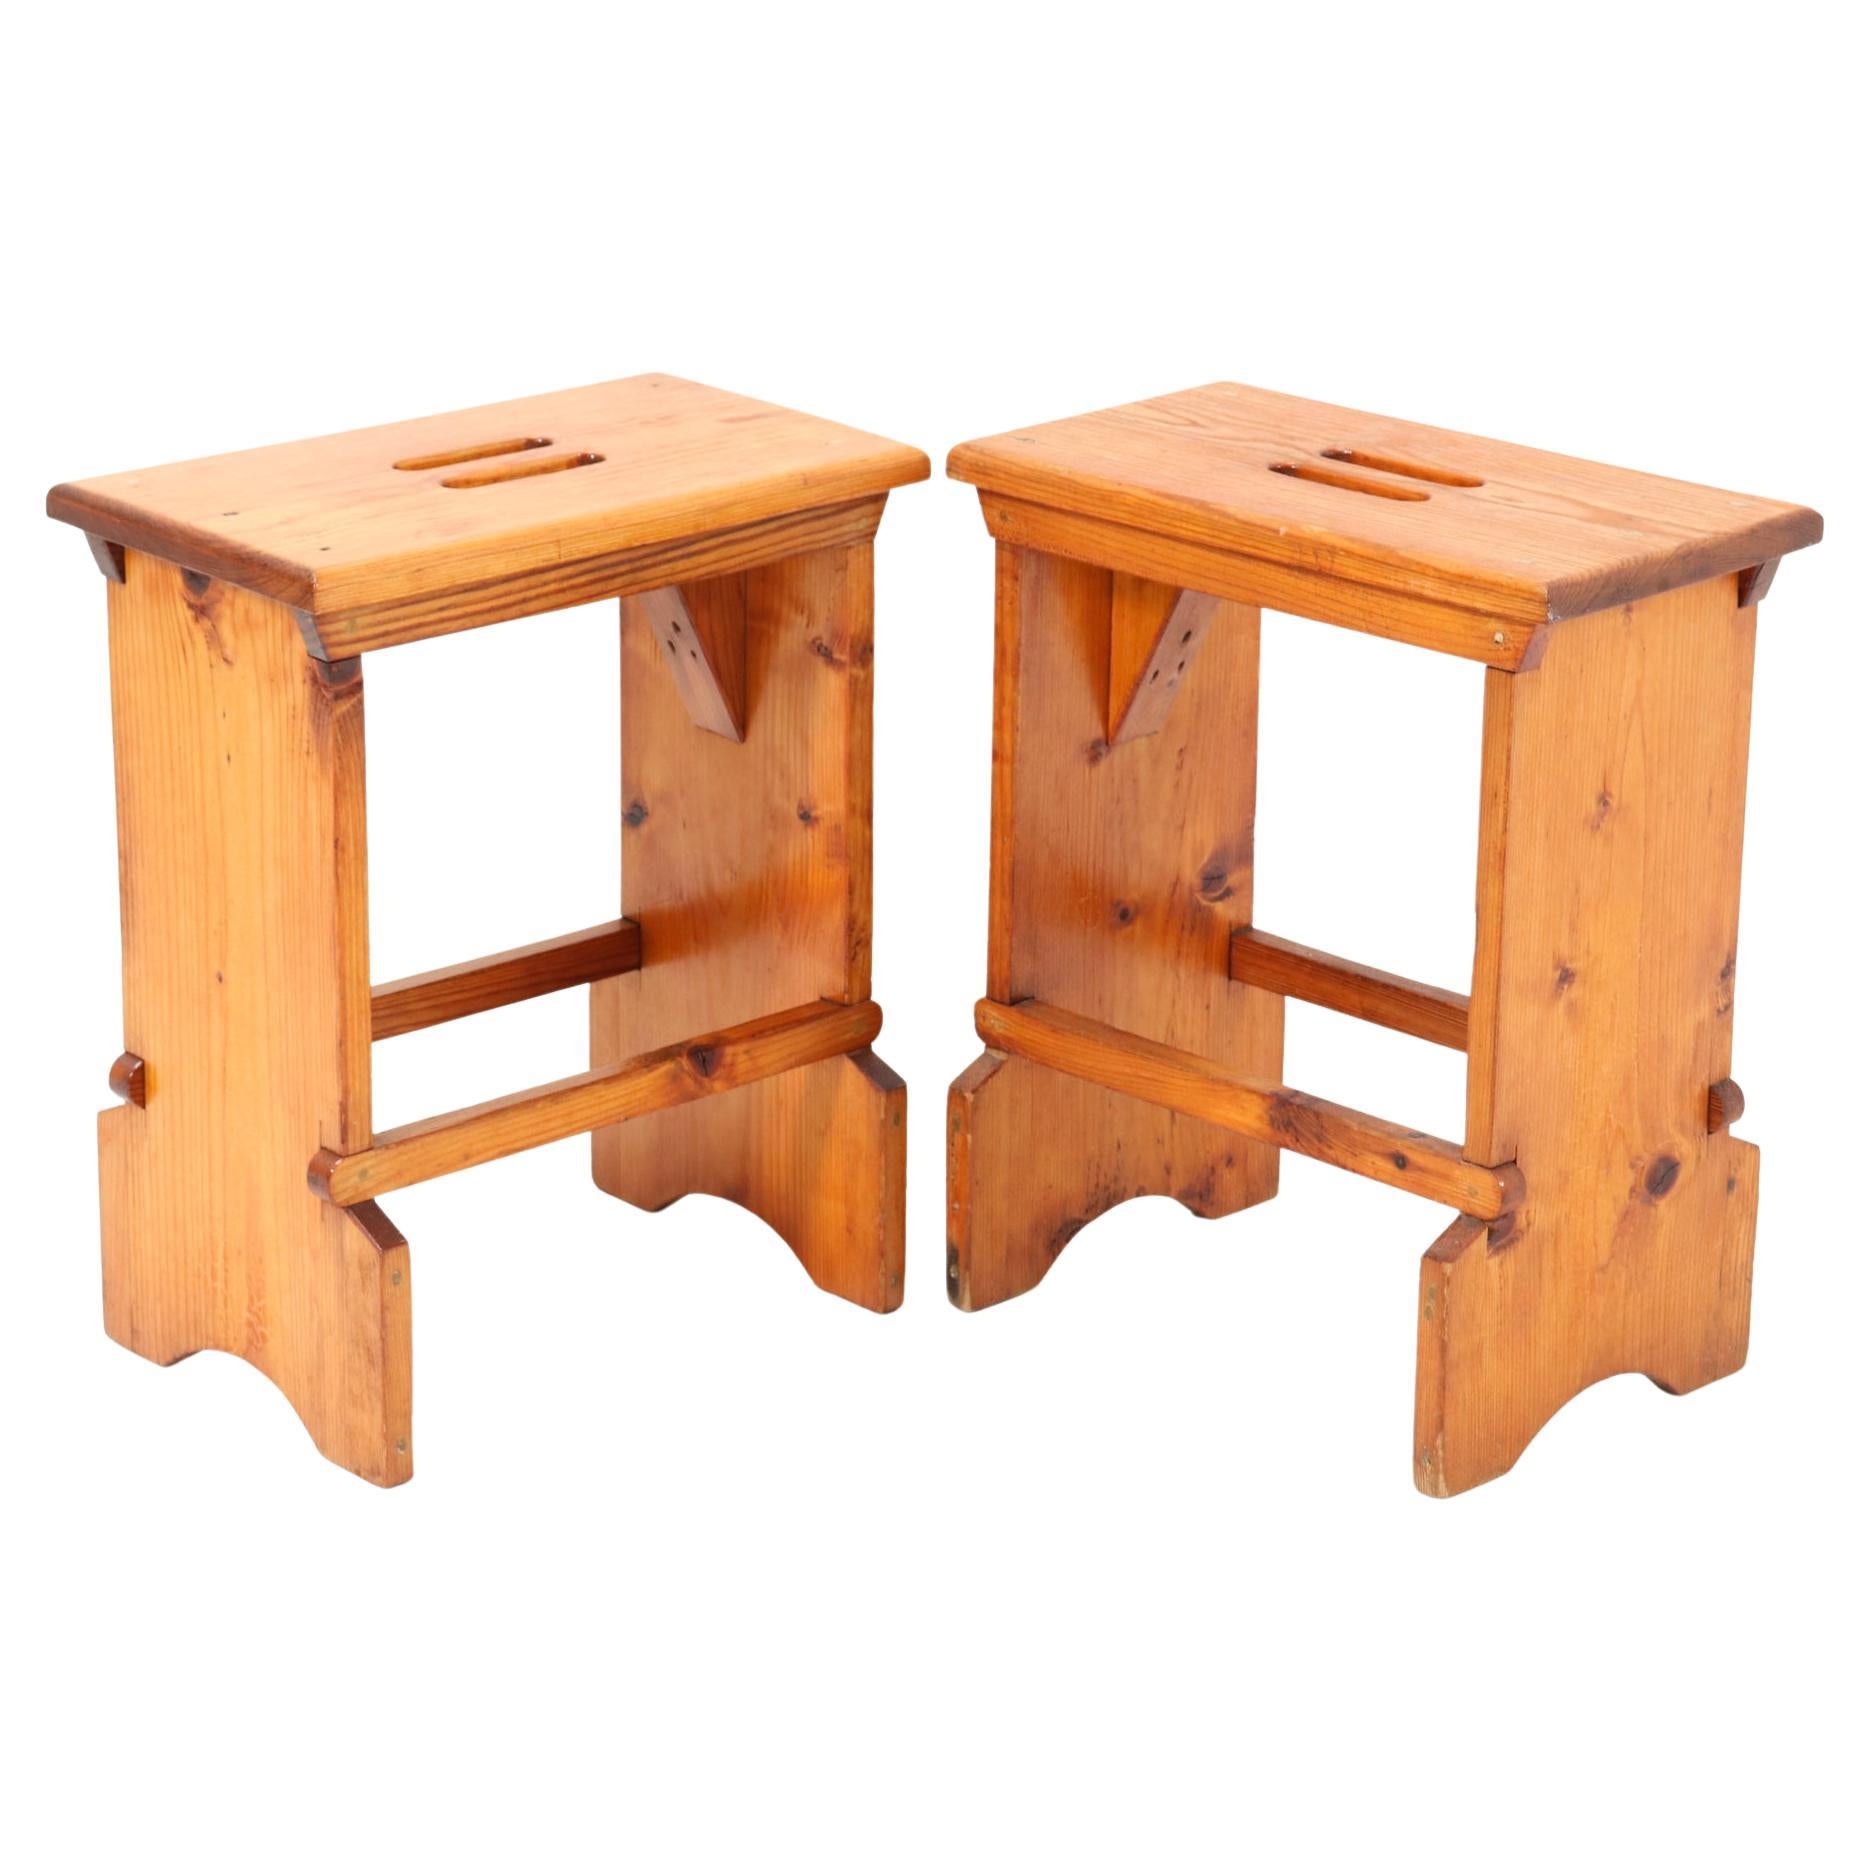 Two Pine Mid-Century Modern Monastery Stools, 1960s For Sale